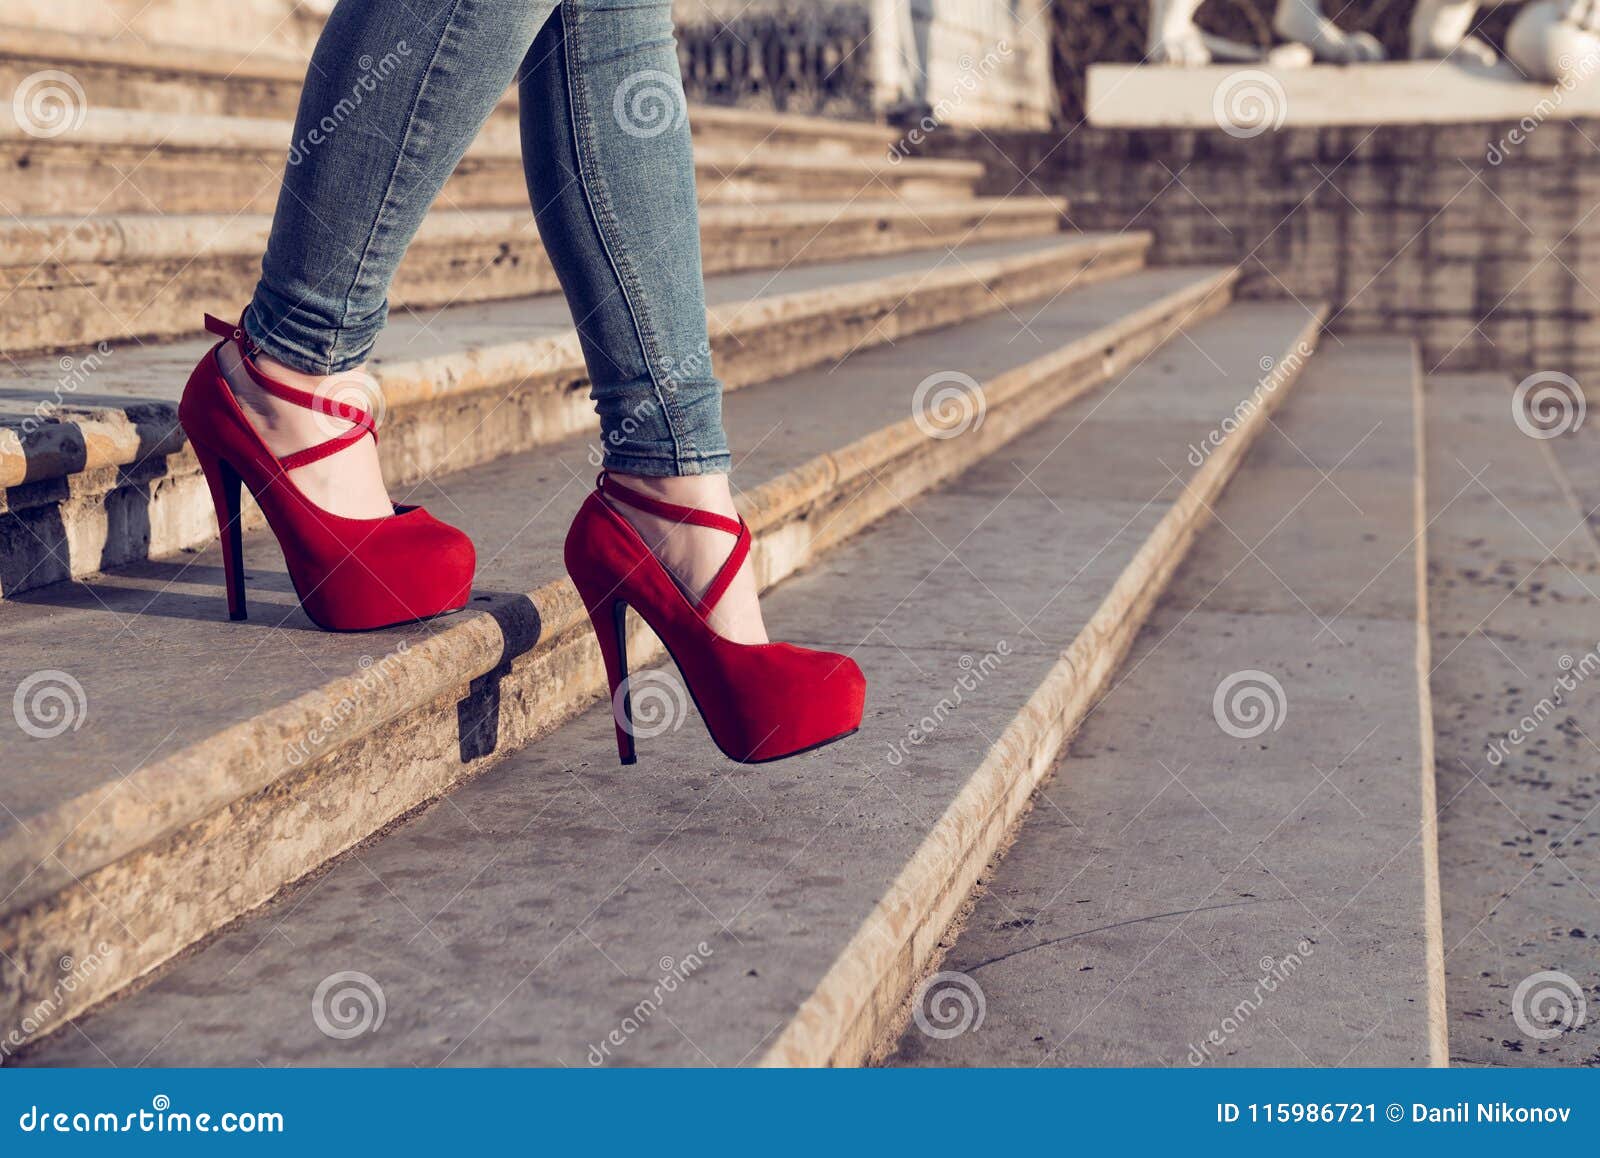 Woman Wearing Blue Jeans and Red High Heel Shoes in Old Town. the Women ...